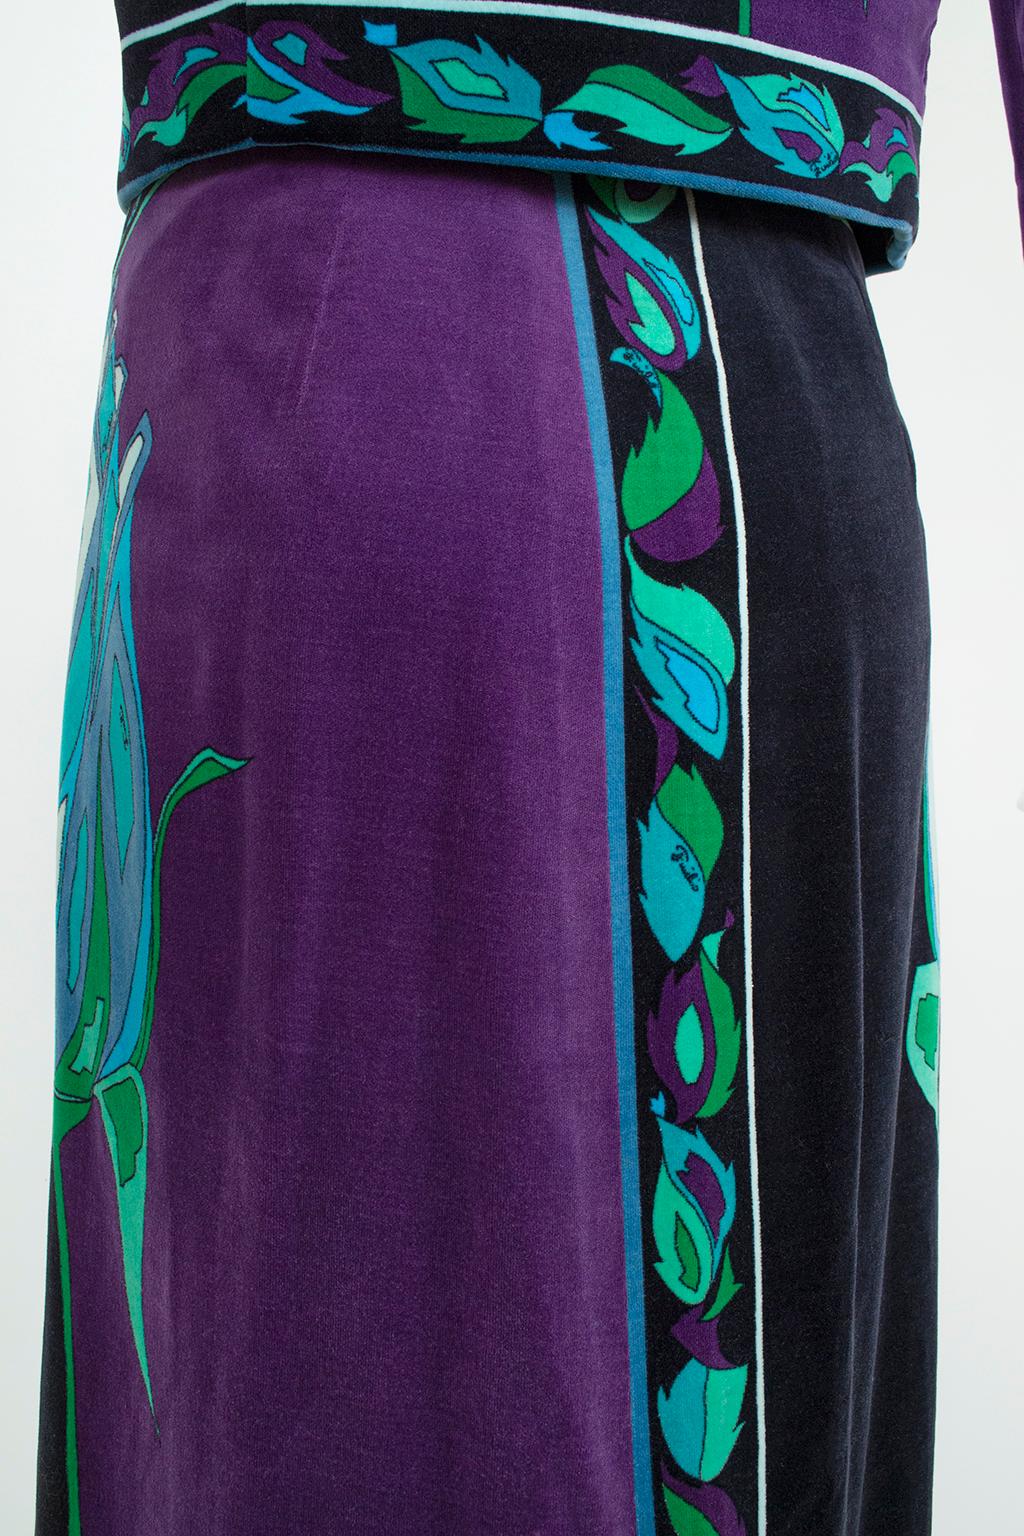 Emilio Pucci Black and Purple Rose Velvet Jacket and Maxi Skirt, Saks – S, 1971 For Sale 12